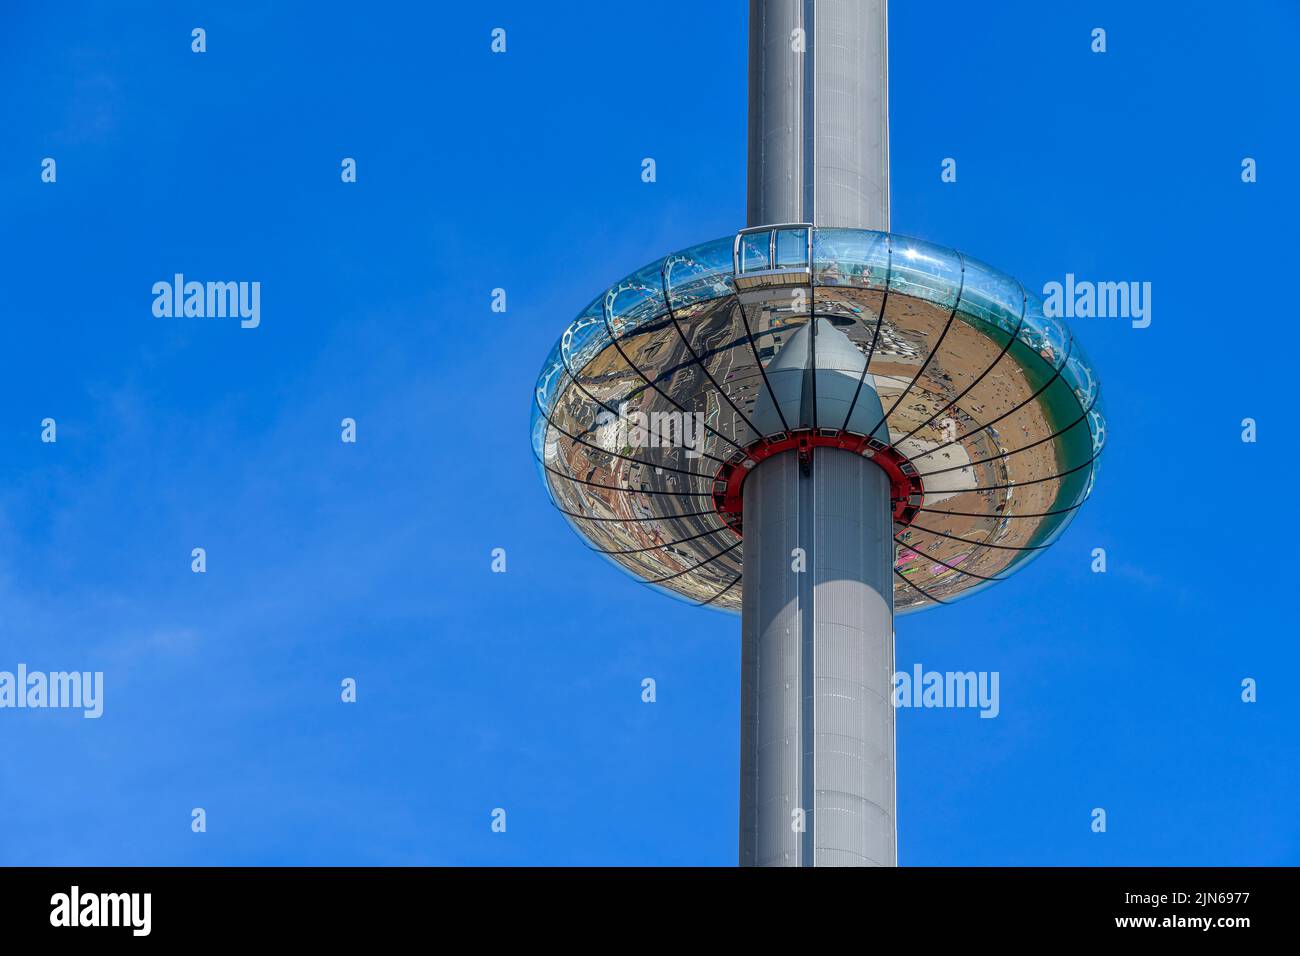 Closeups of Brighton's iconic British Airways i360 Viewing Tower. The curvaceous glass pod takes 10 minutes to gently rise the top of the 162m tower. Stock Photo